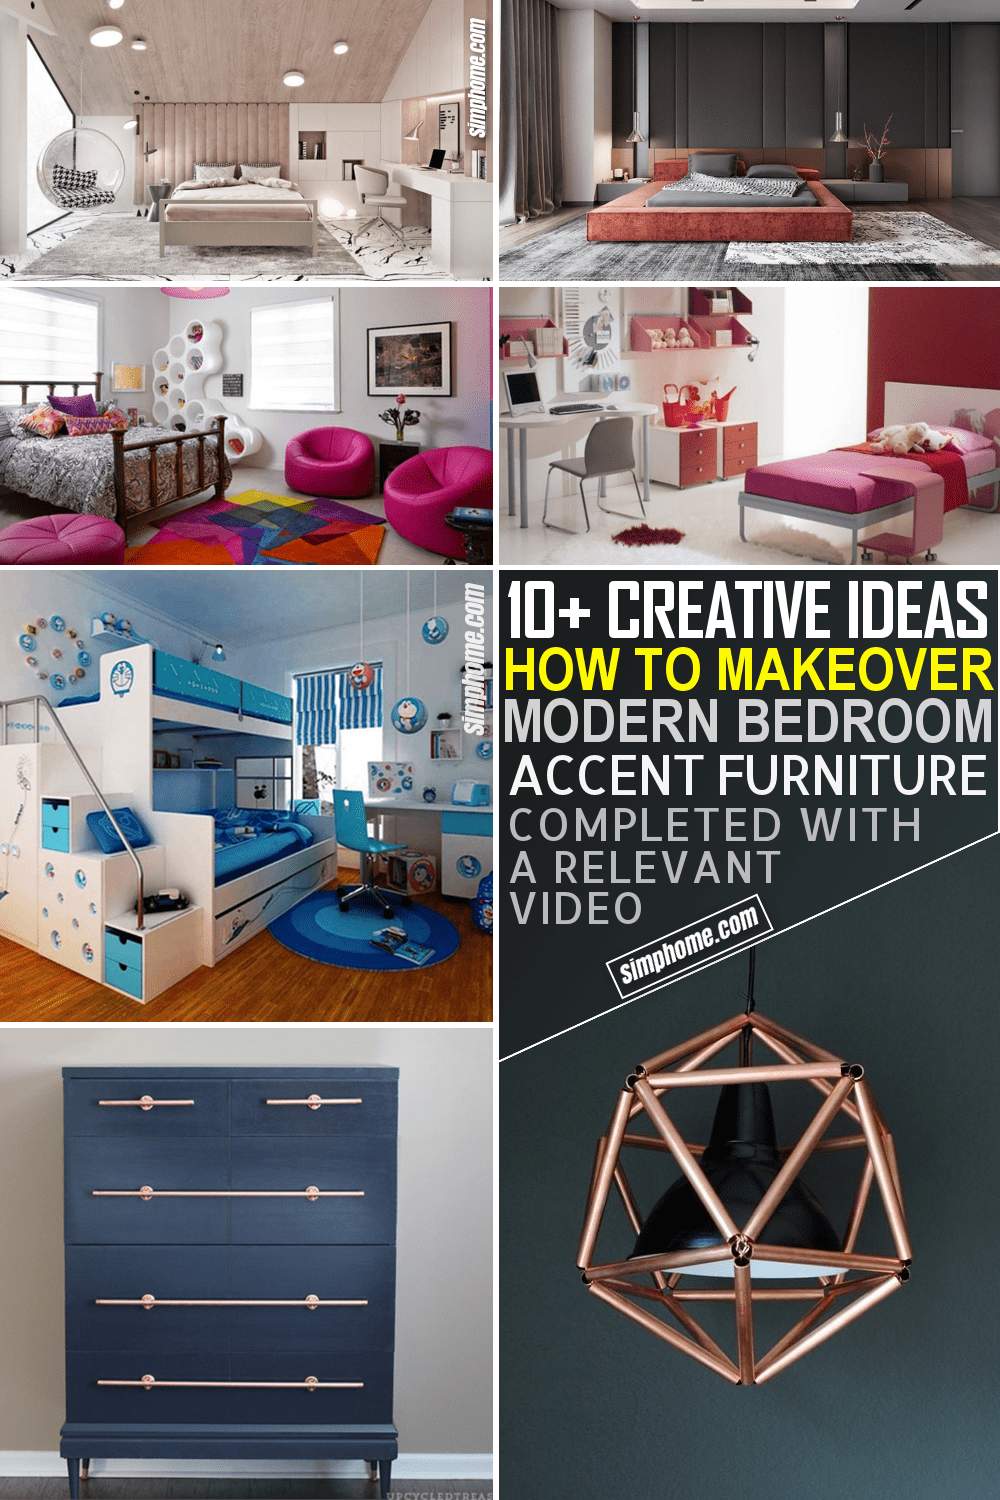 10 Modern Bedroom Accent Furniture Ideas by Simphome.com Featured Image